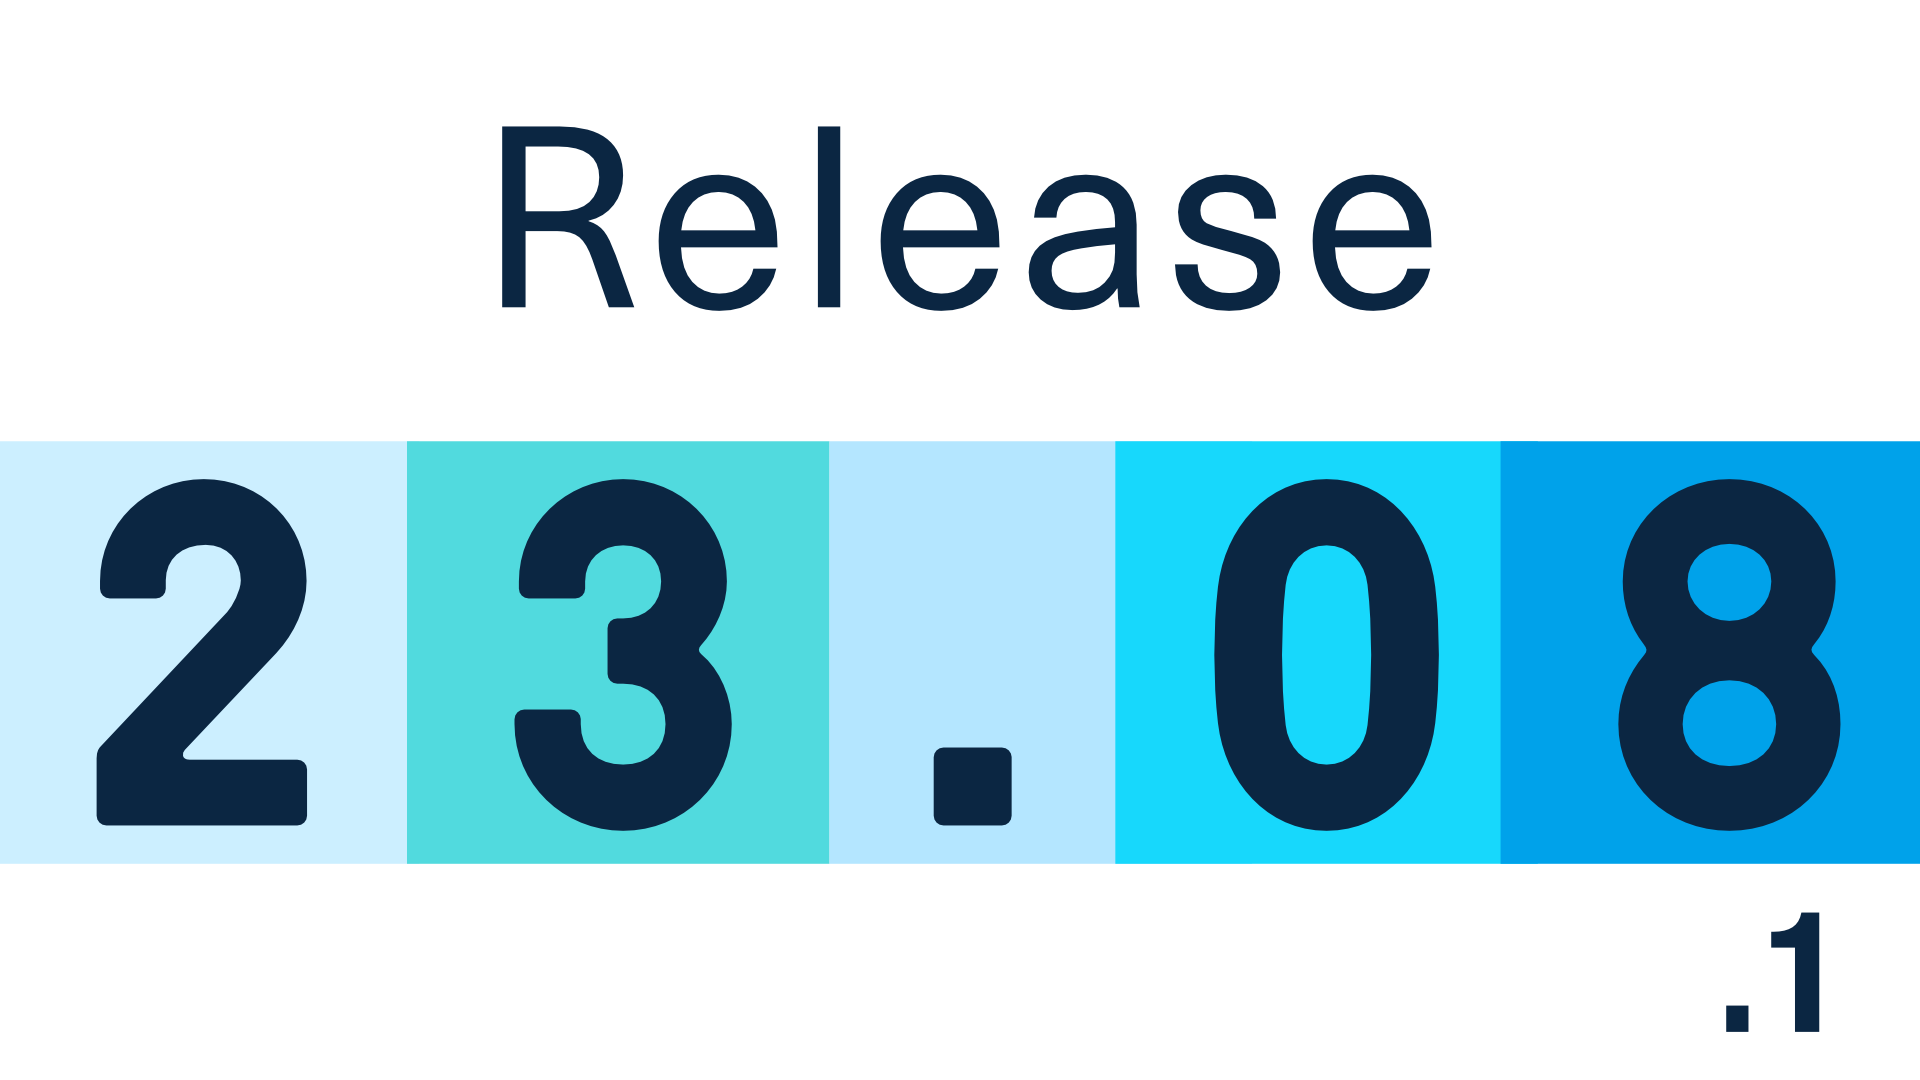 Release - 23.08.1